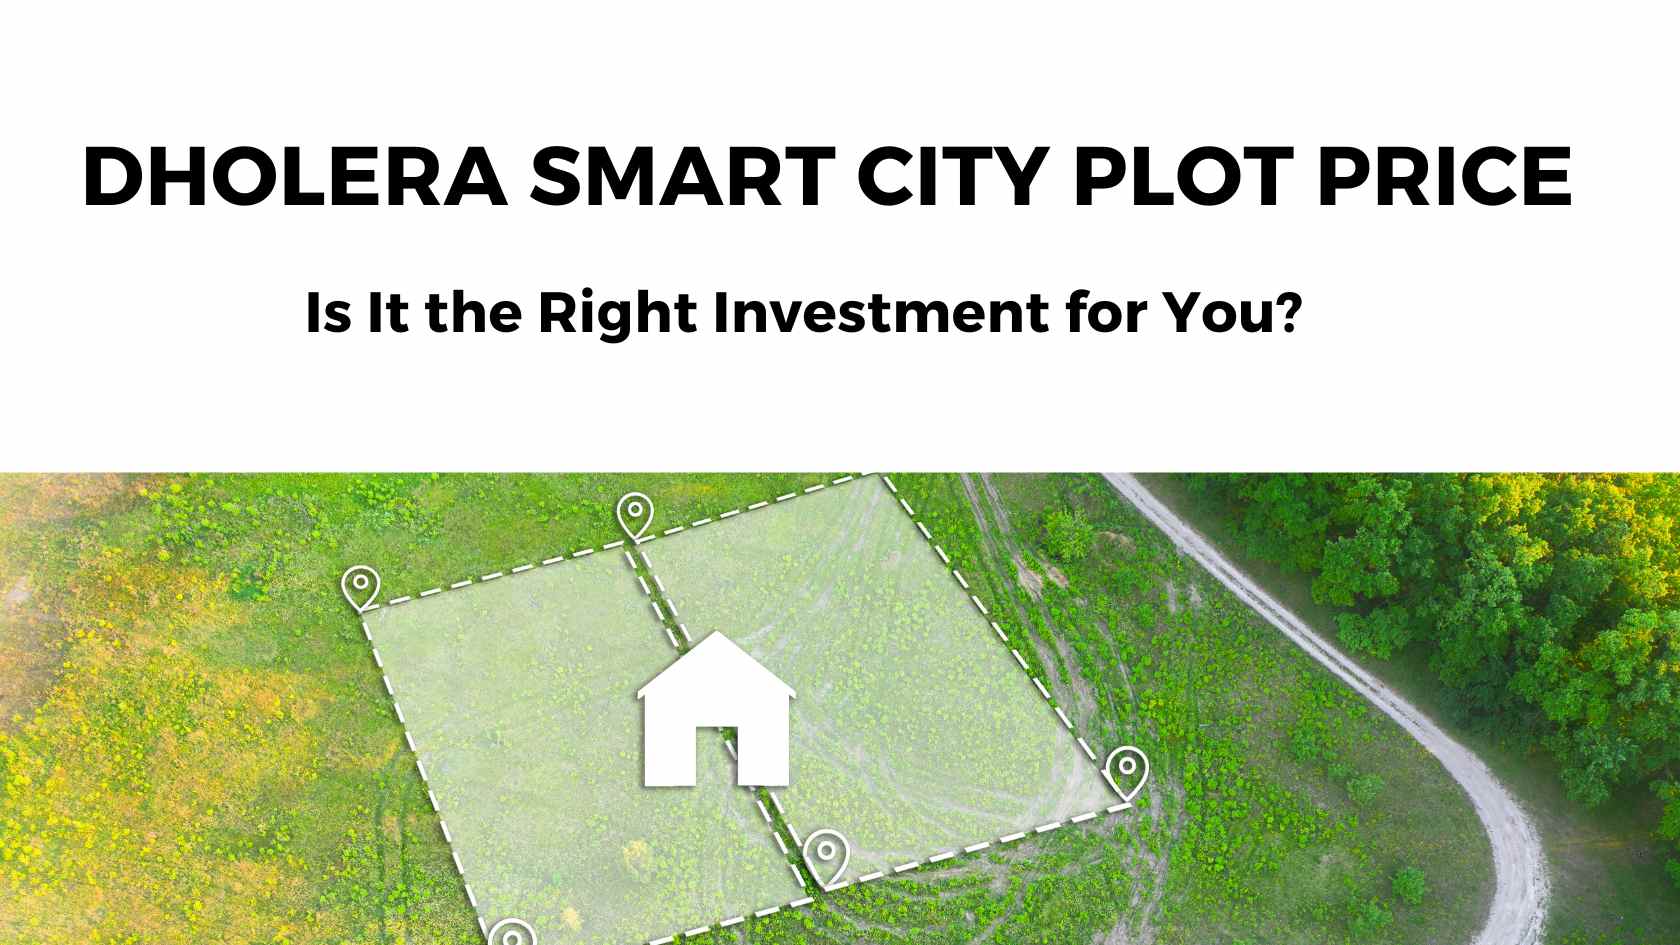 You are currently viewing Dholera Smart City Plot Price Analysis: Is It the Right Investment for You?